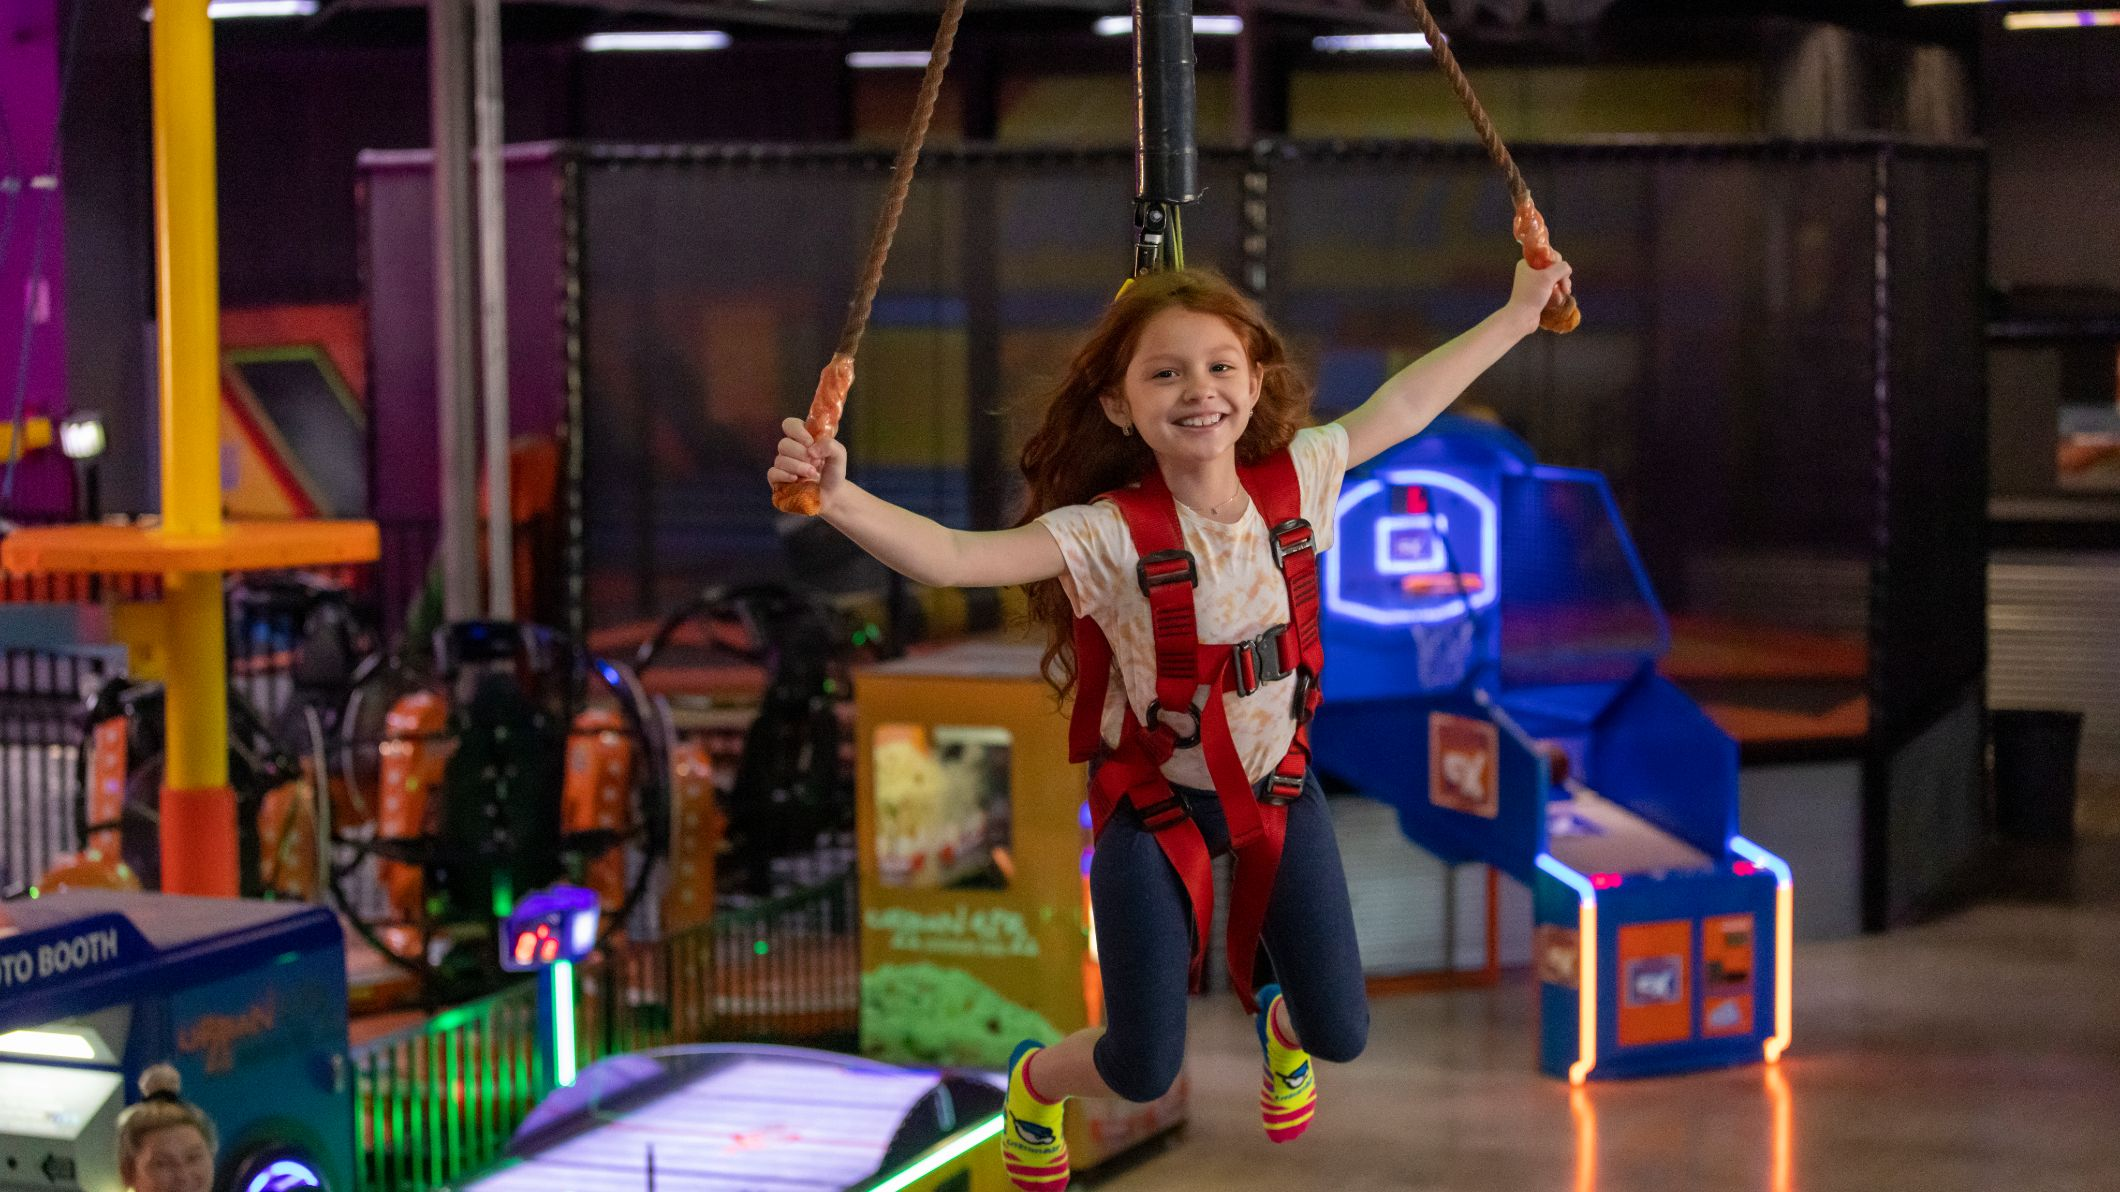 A 7-year-old girl enjoys the Sky Rider Indoor Zipline attraction at Urban Air